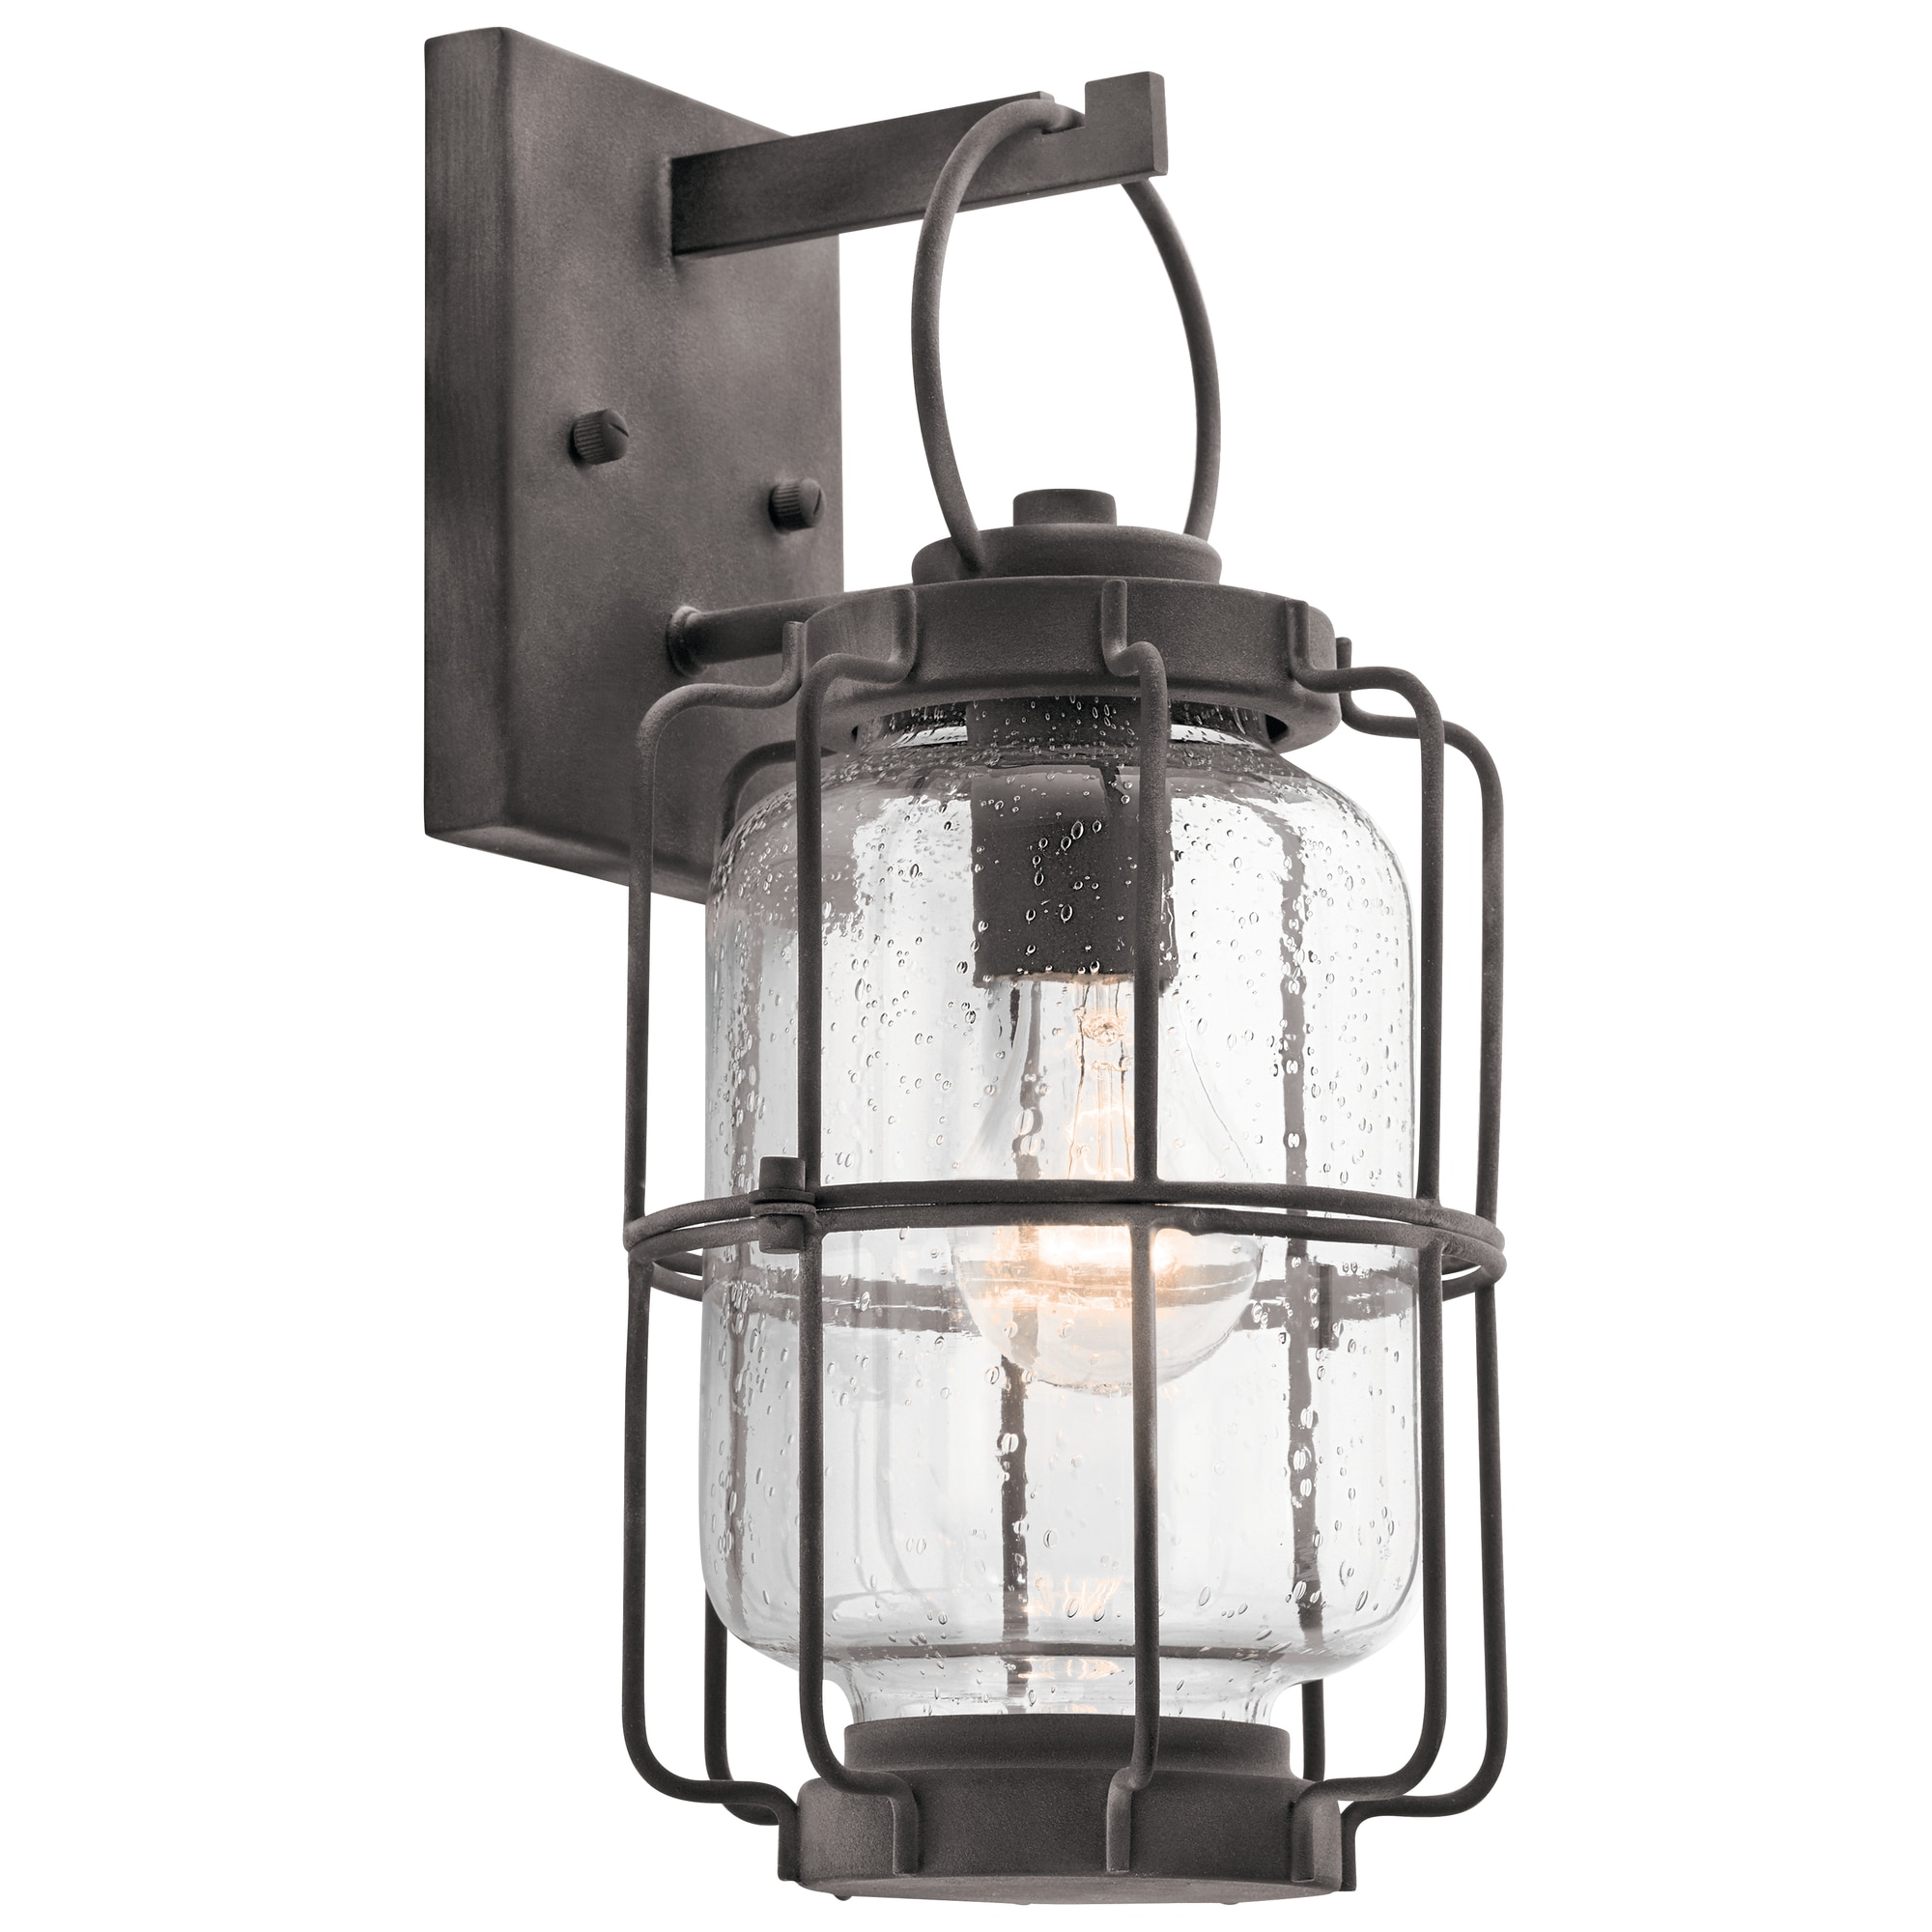 Kichler Montview 1 Light 1413 In Weathered Zinc Outdoor Wall Light In